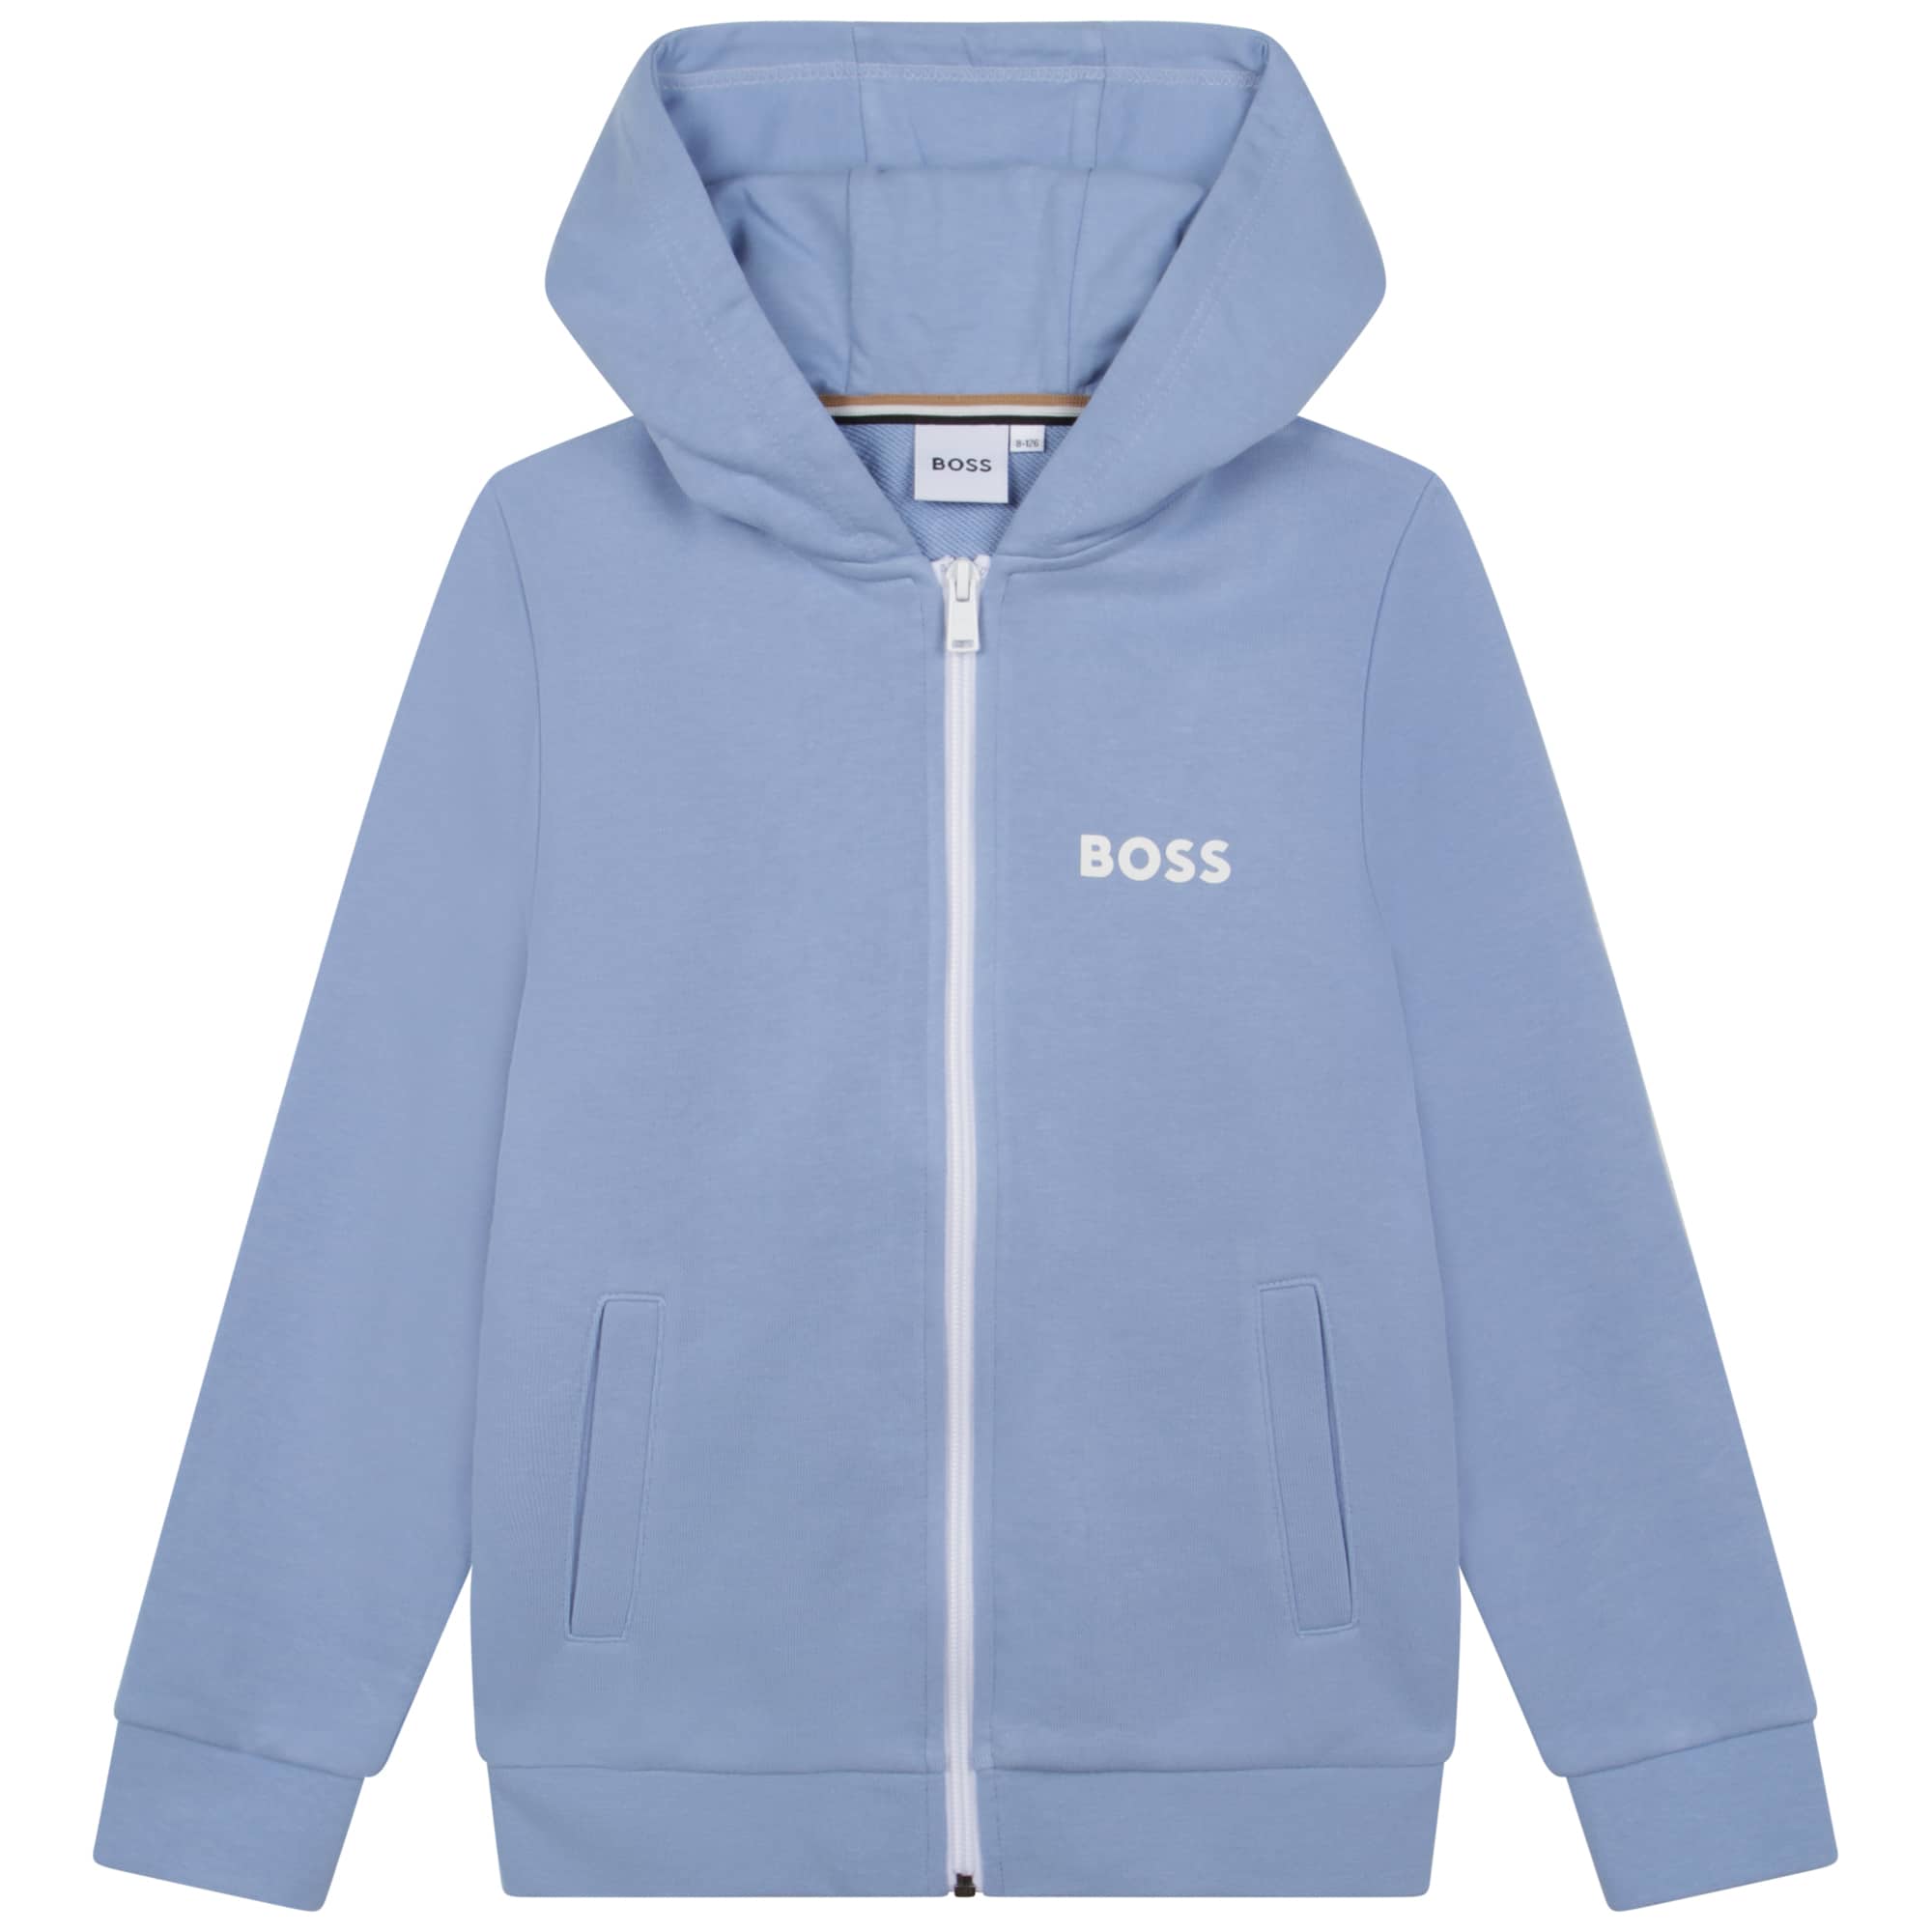 Boss boys pale blue hoodie with small white logo